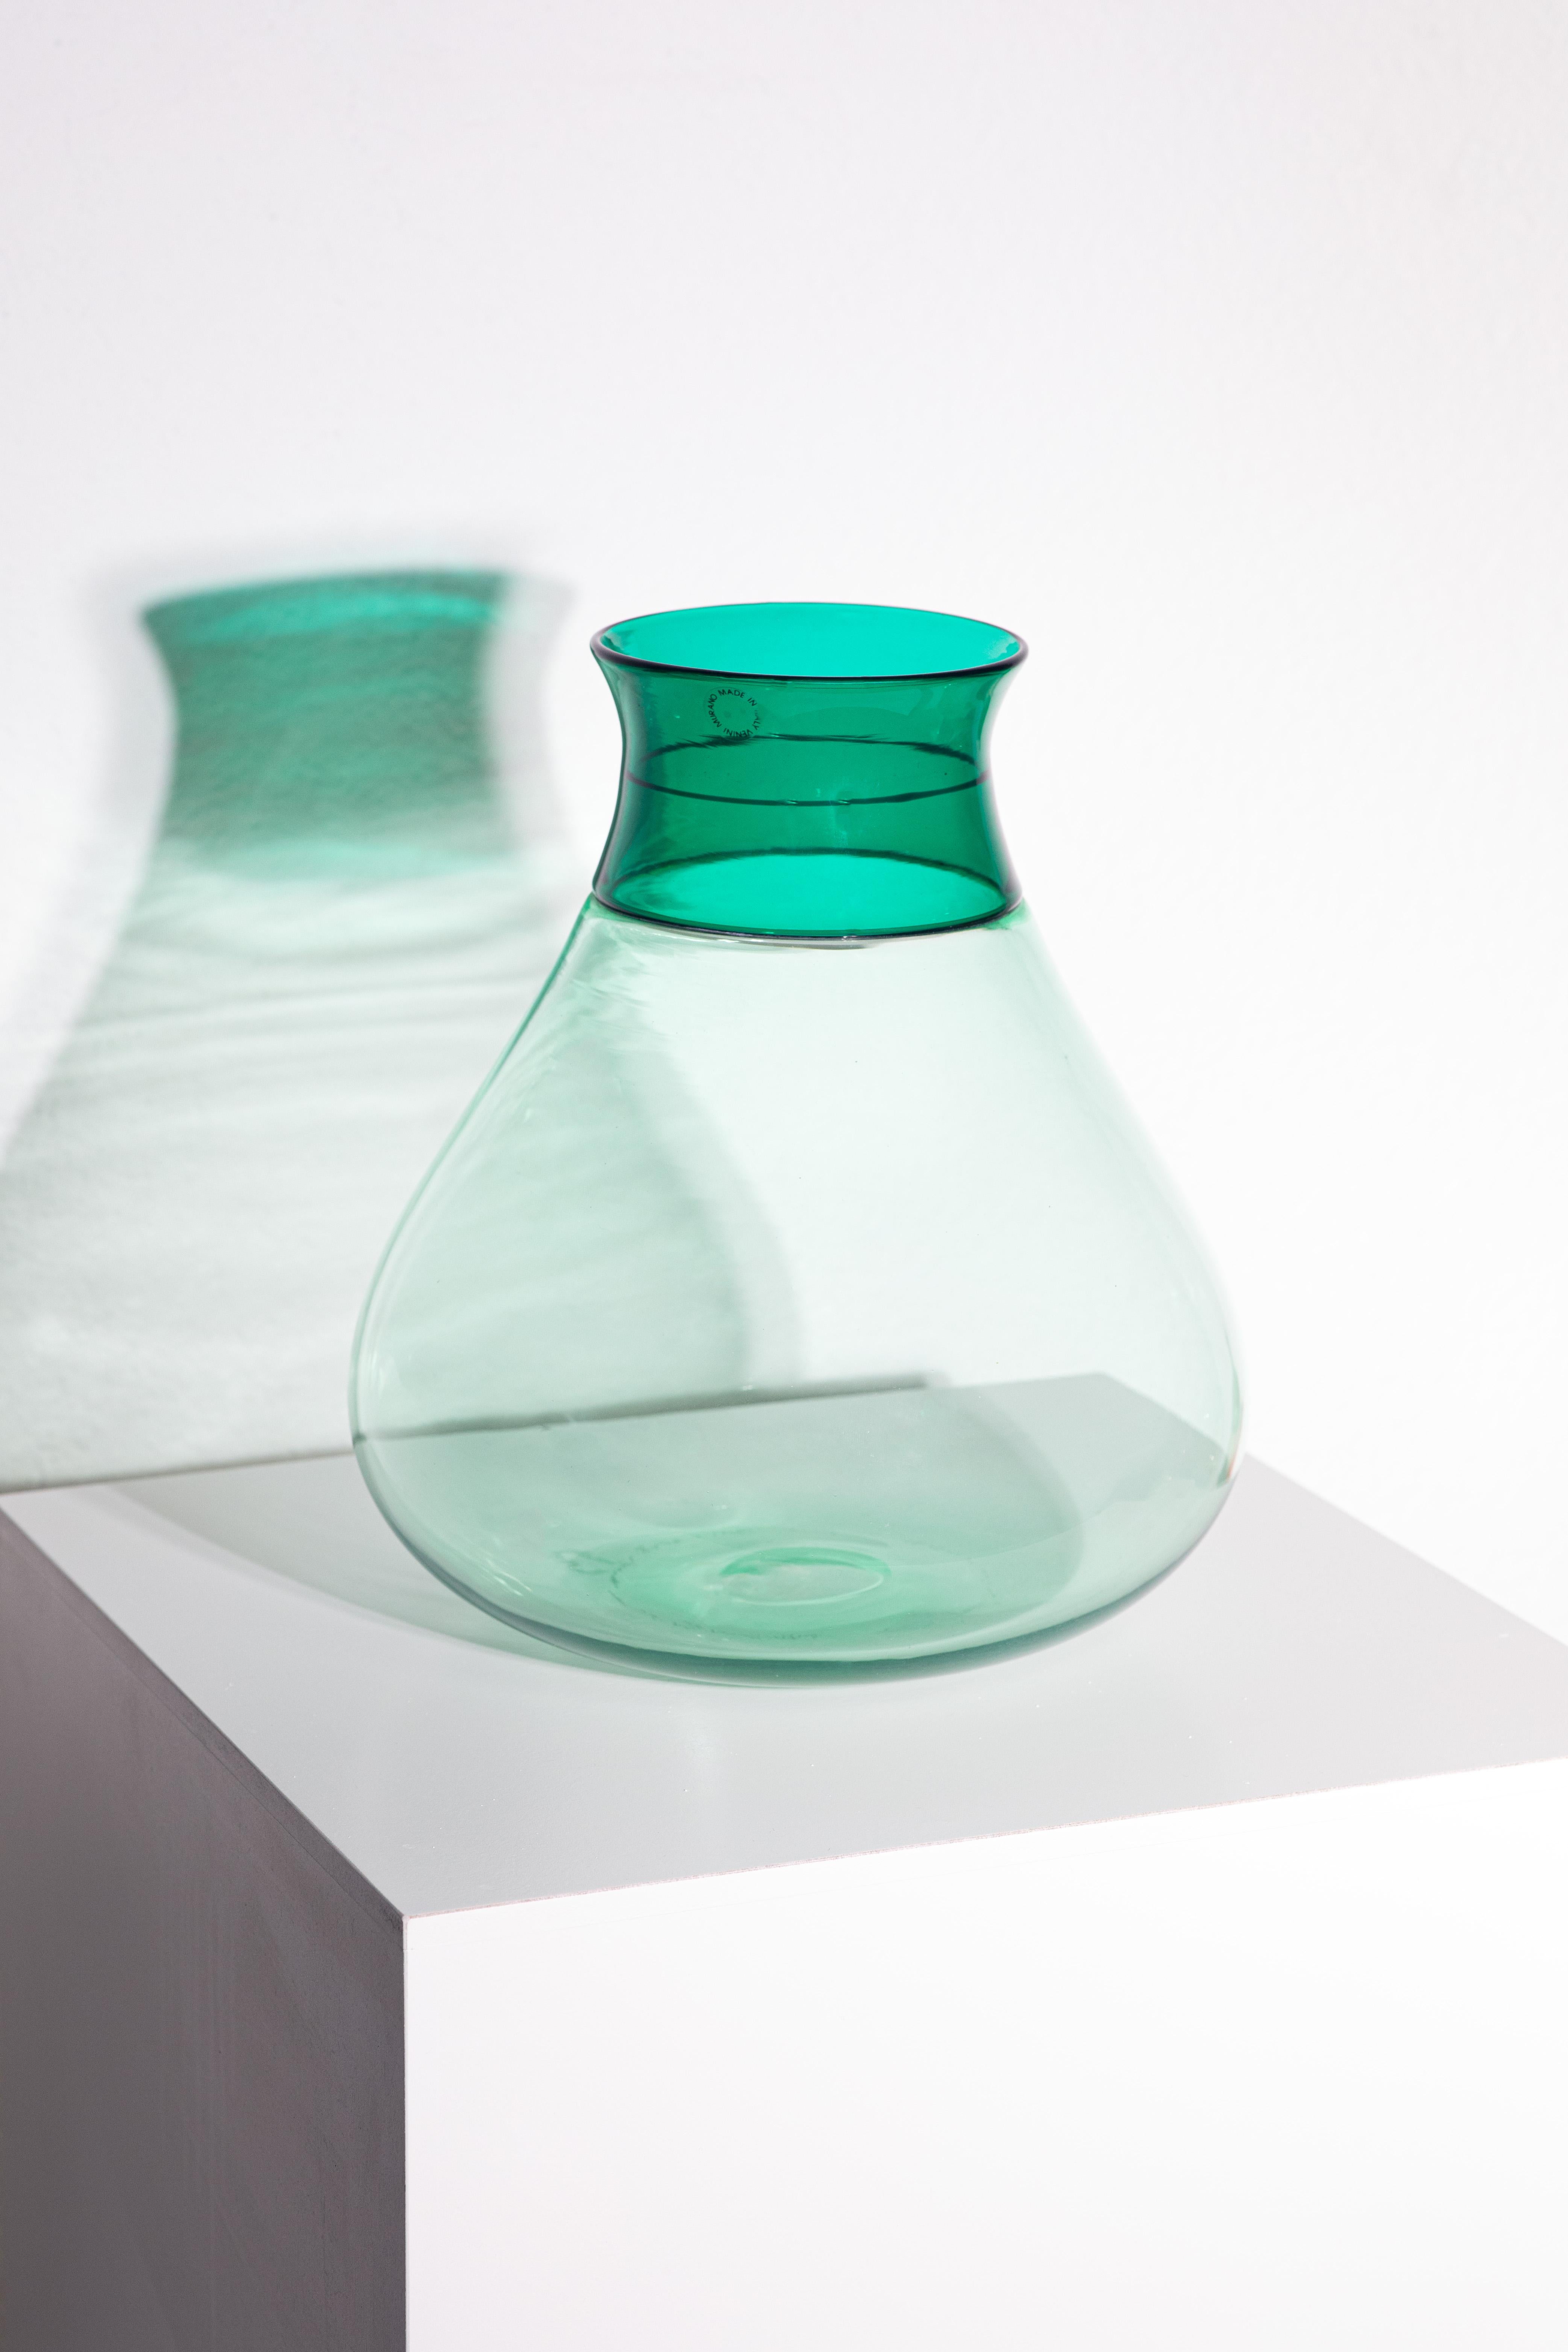 Ludovico Diaz de Santillana (1931-1989) was an Italian glass designer, and he is particularly well-known for his work with the Venini glass company. He was the artistic director of Venini from 1959 to 1985, and during his tenure, he created a wide